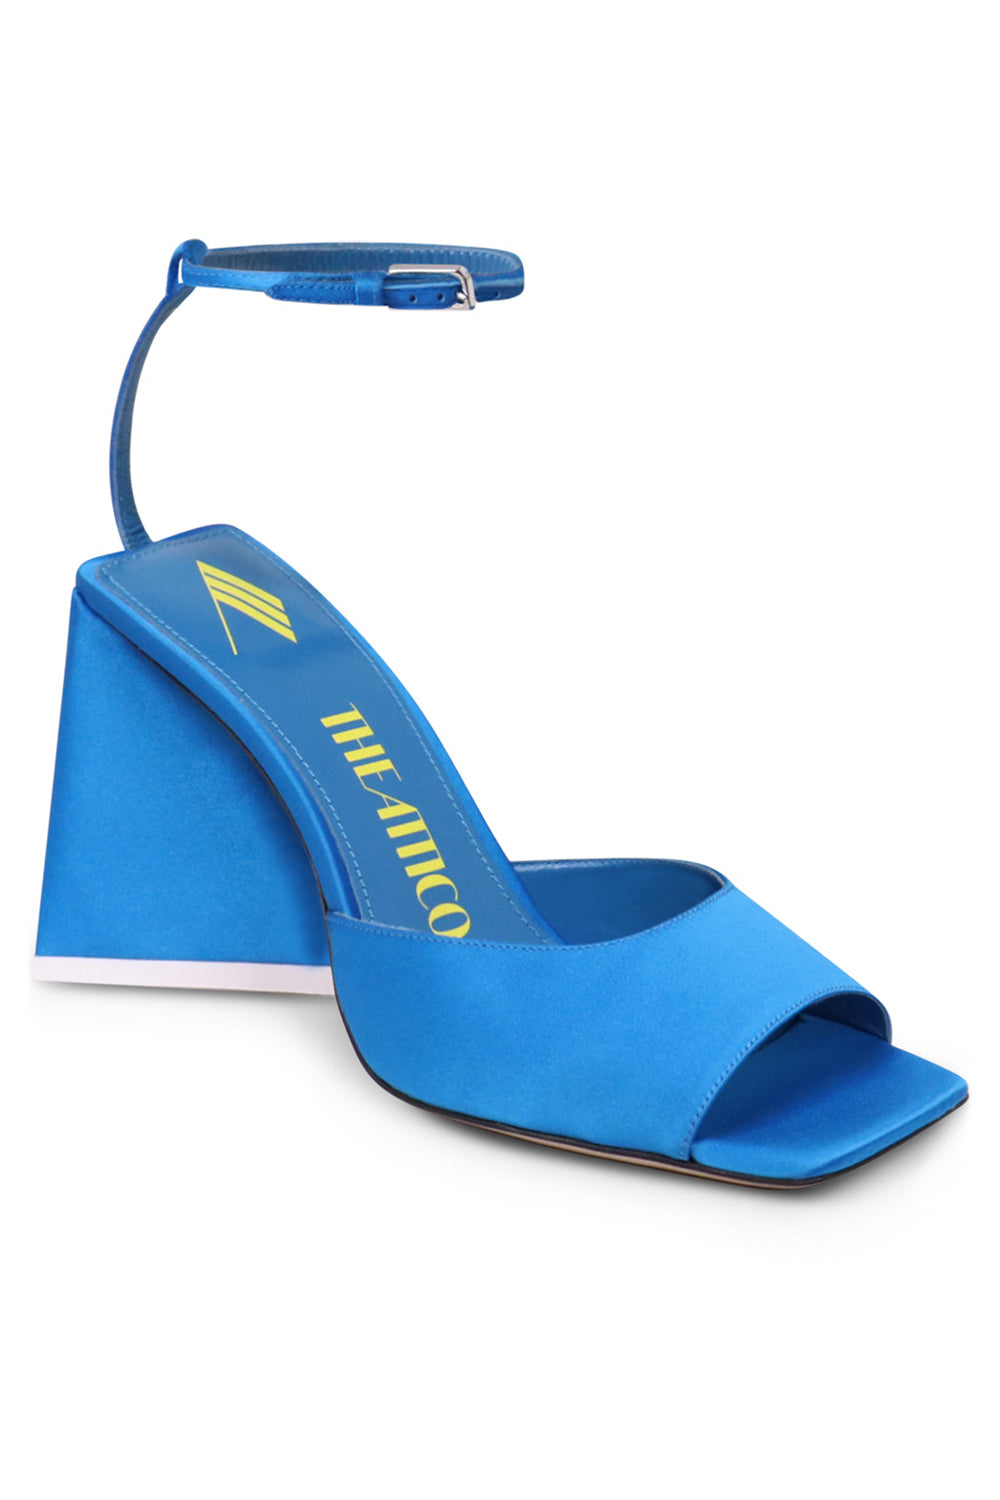 THE ATTICO SHOES PIPER 85MM SANDAL | TURQUOISE